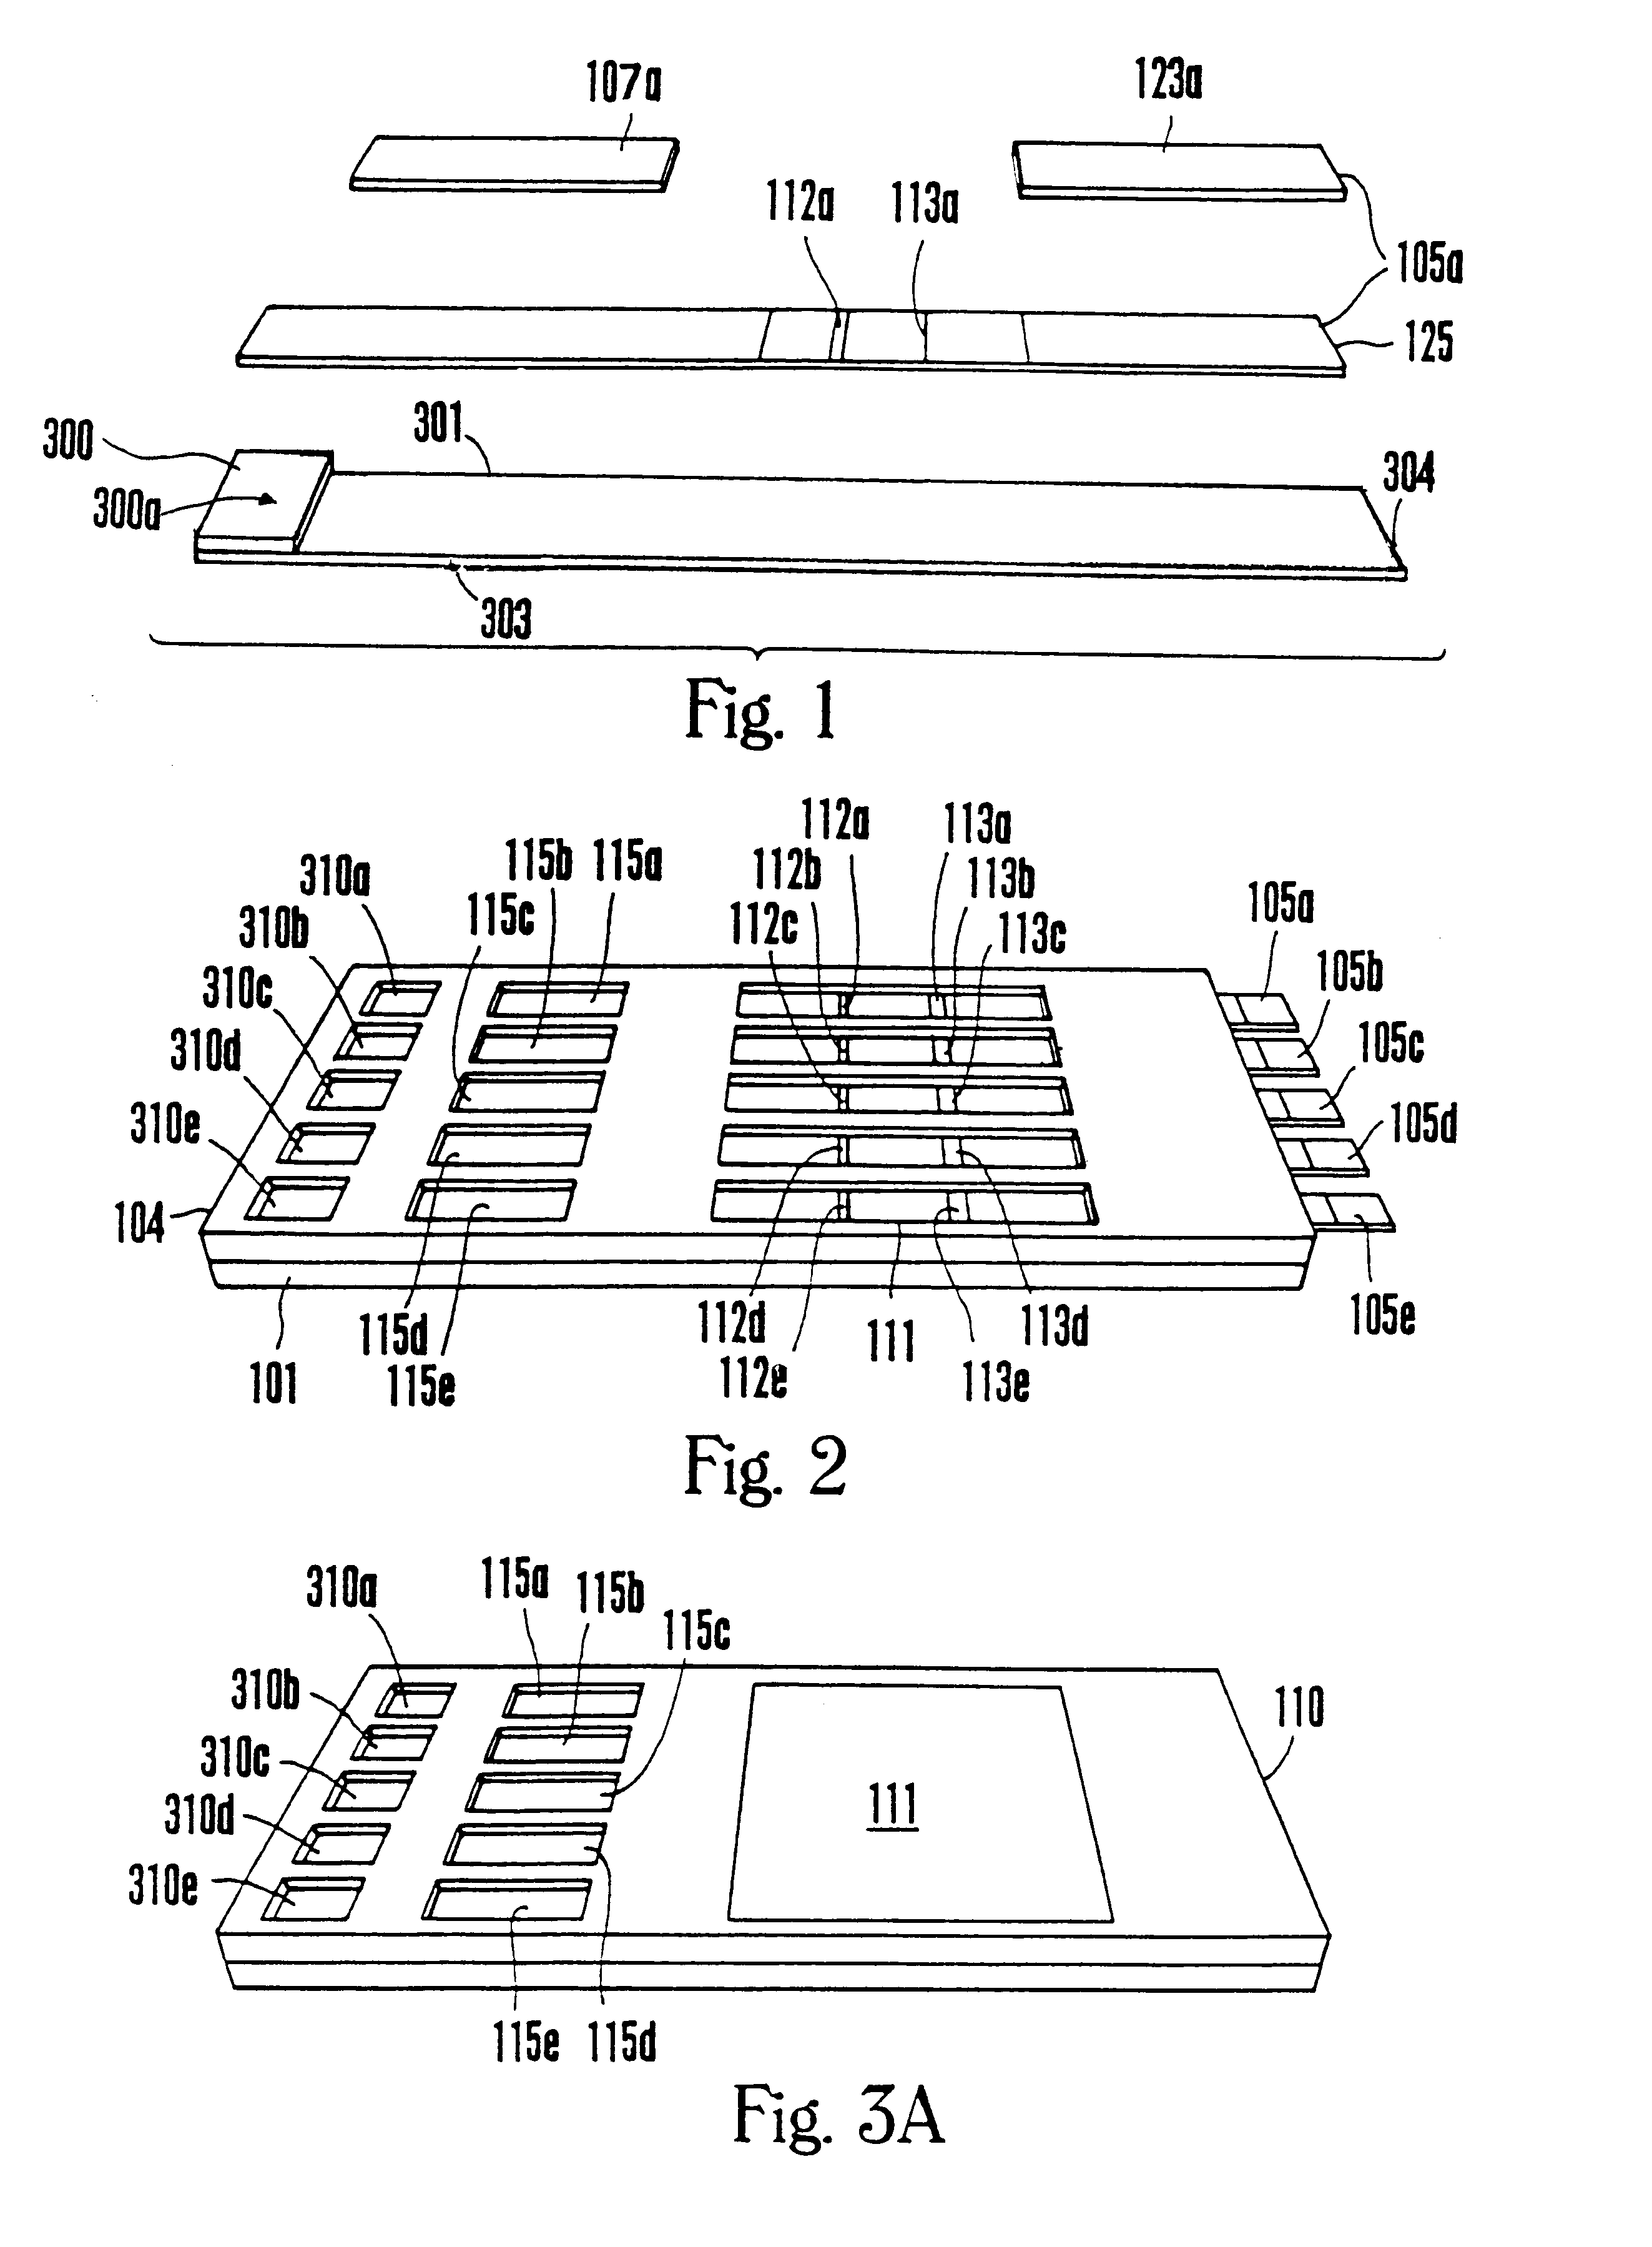 Multiple analyte assay device with sample integrity monitoring system